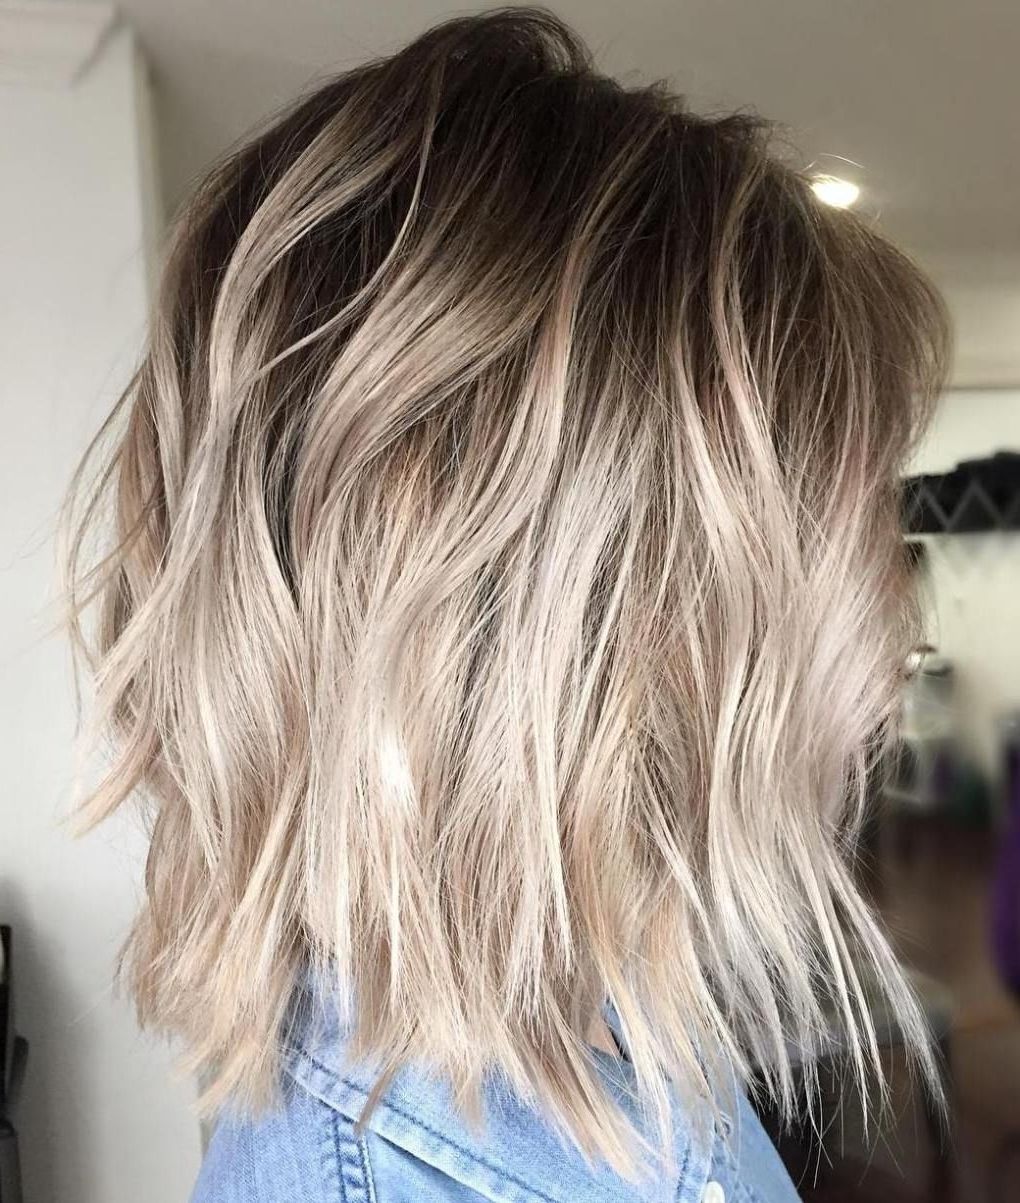 40 Beautiful Blonde Balayage Looks | Projects To Try | Pinterest Within 2018 Feathered Pixie Haircuts With Balayage Highlights (Photo 13 of 15)